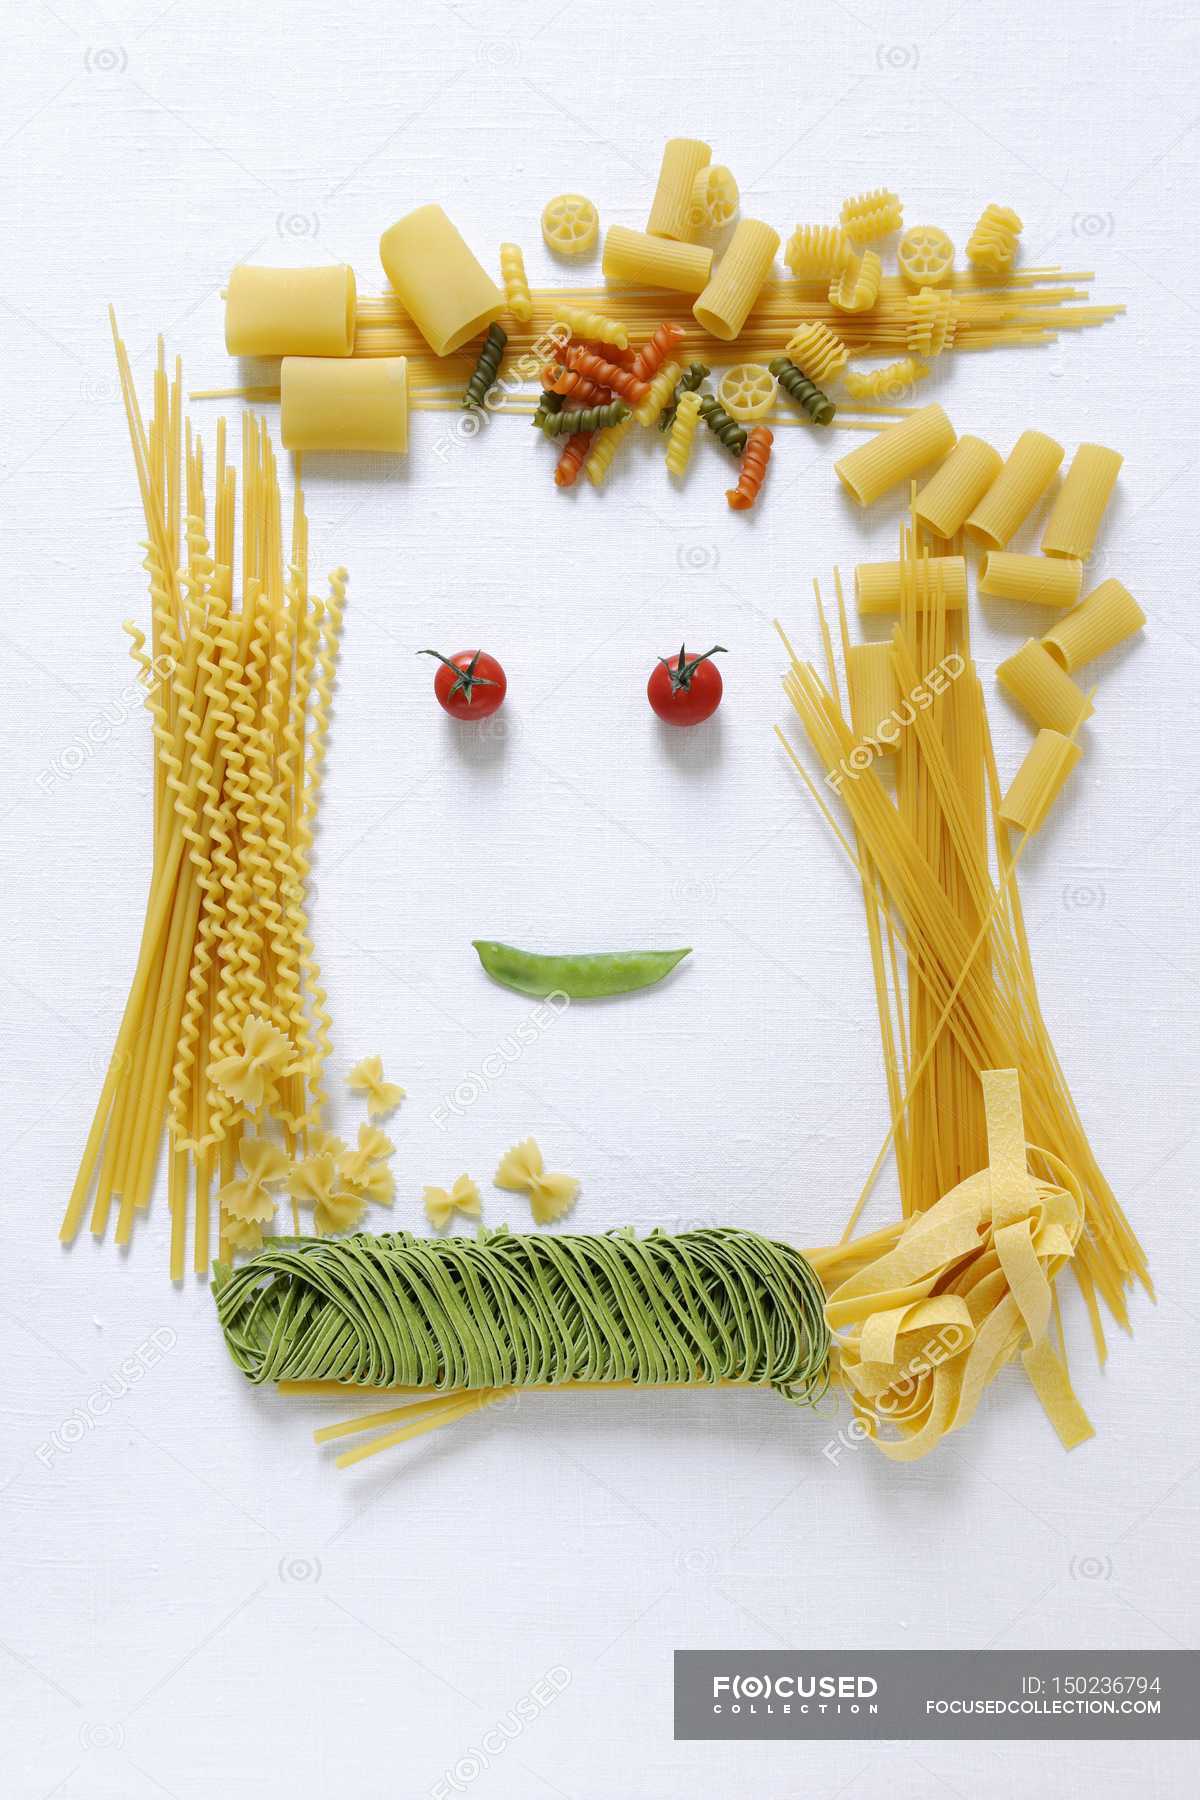 Amusing face made from pasta — objects, healthy - Stock Photo | #150236794